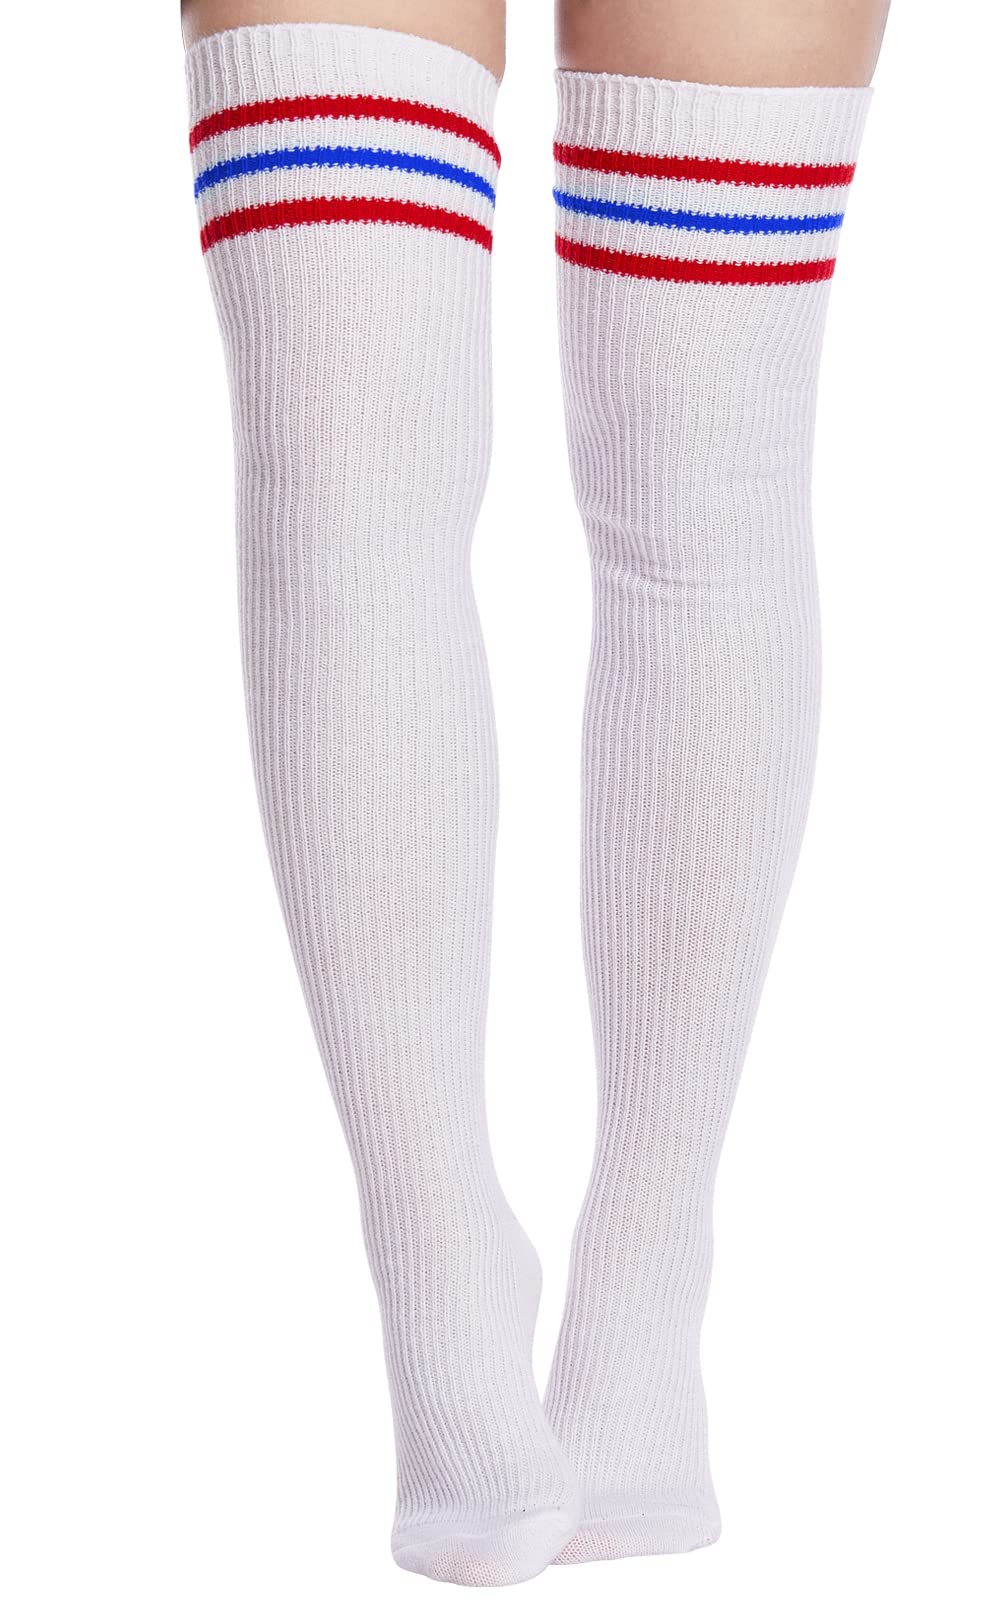 Extra Long Warm Knit Striped Thigh Highs Leg Warmers-White & Blue & Red Striped - Moon Wood